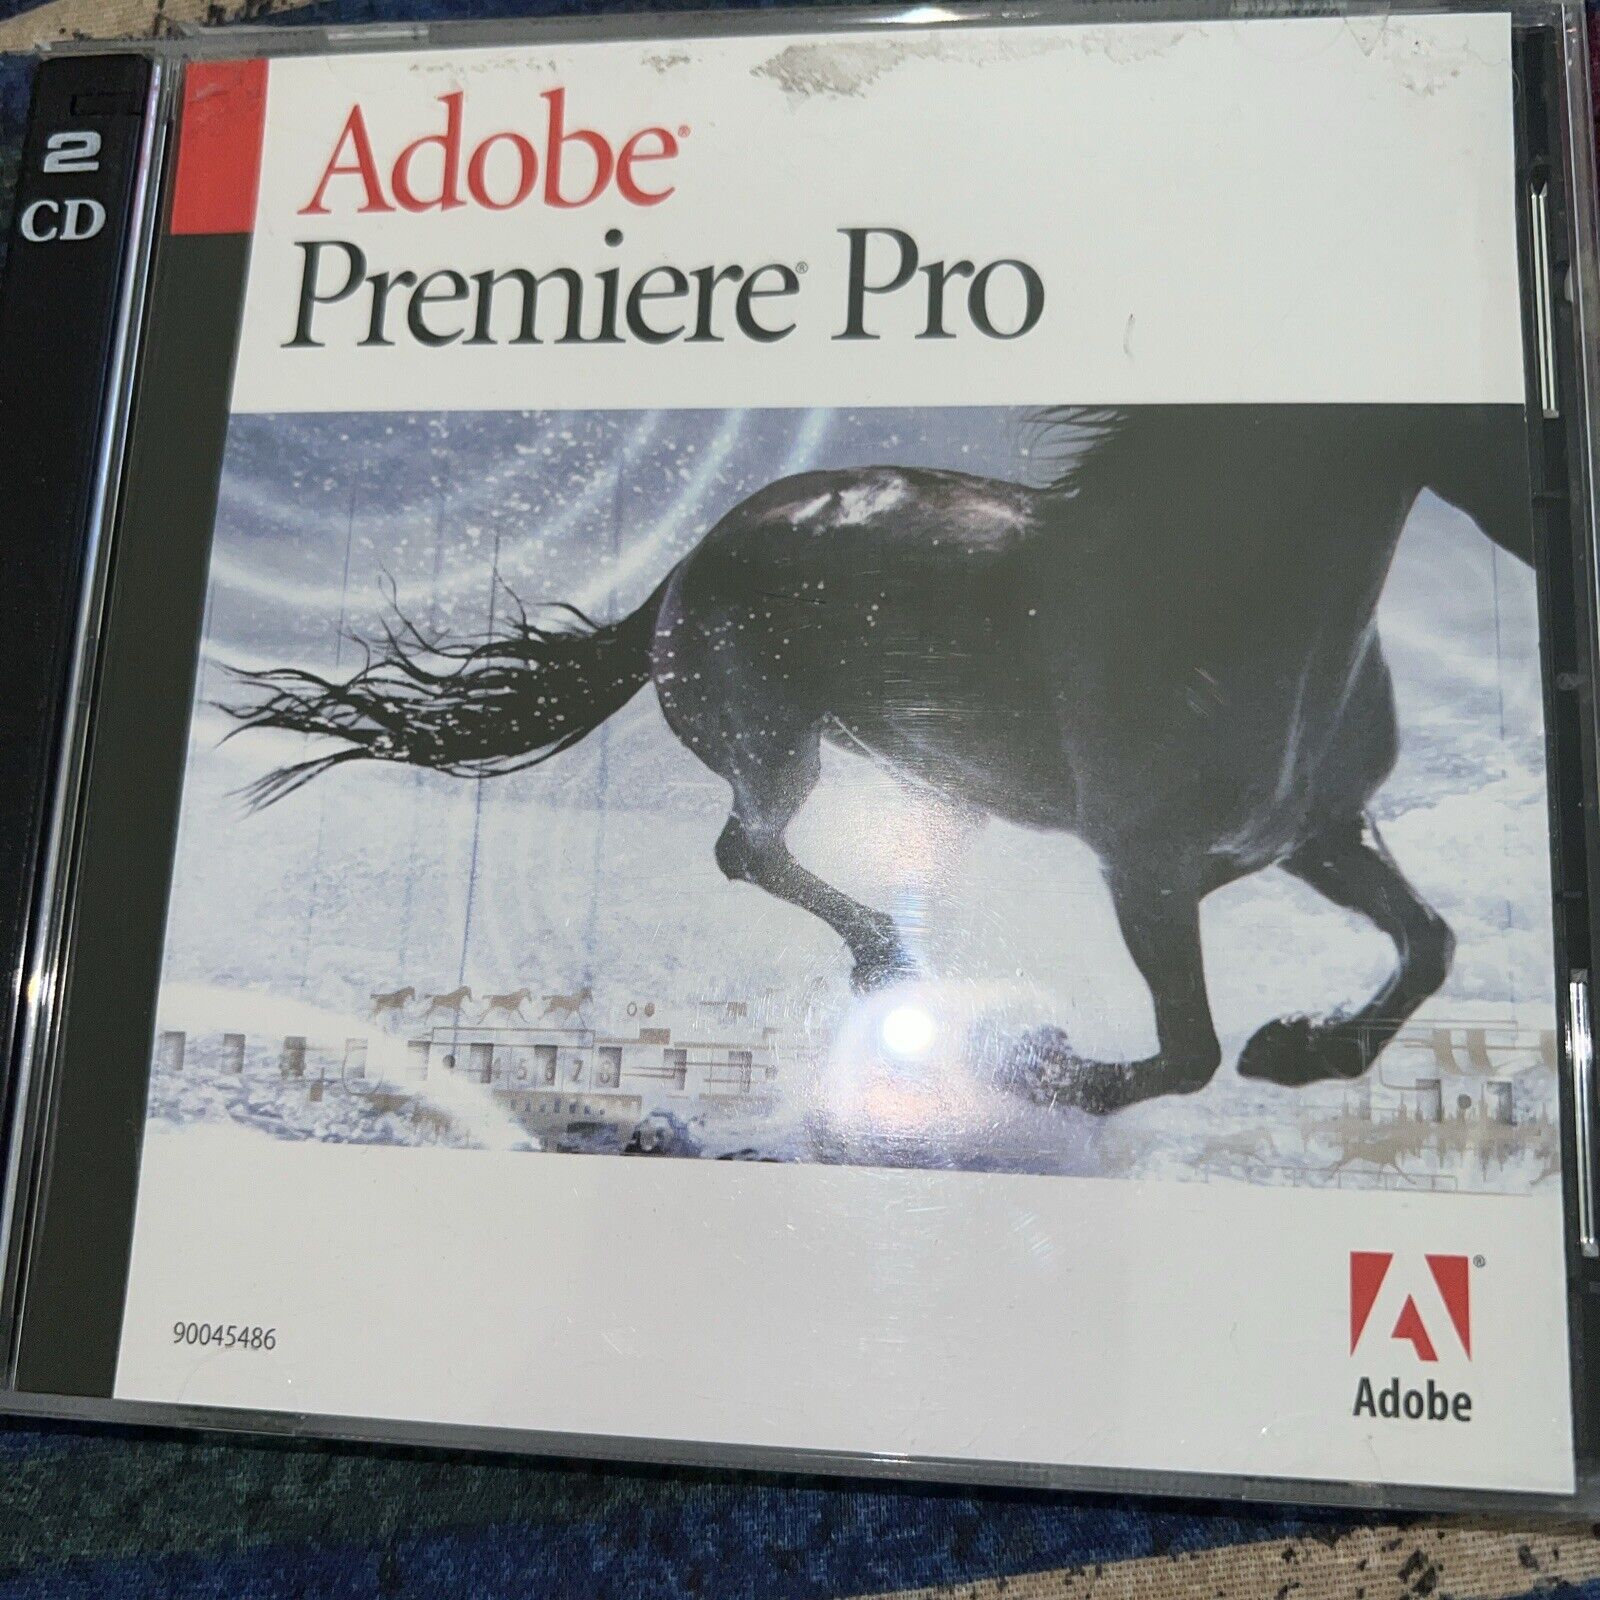 Adobe Premiere Pro 7.0 For Windows, Full Version New Sealed With Serial Number